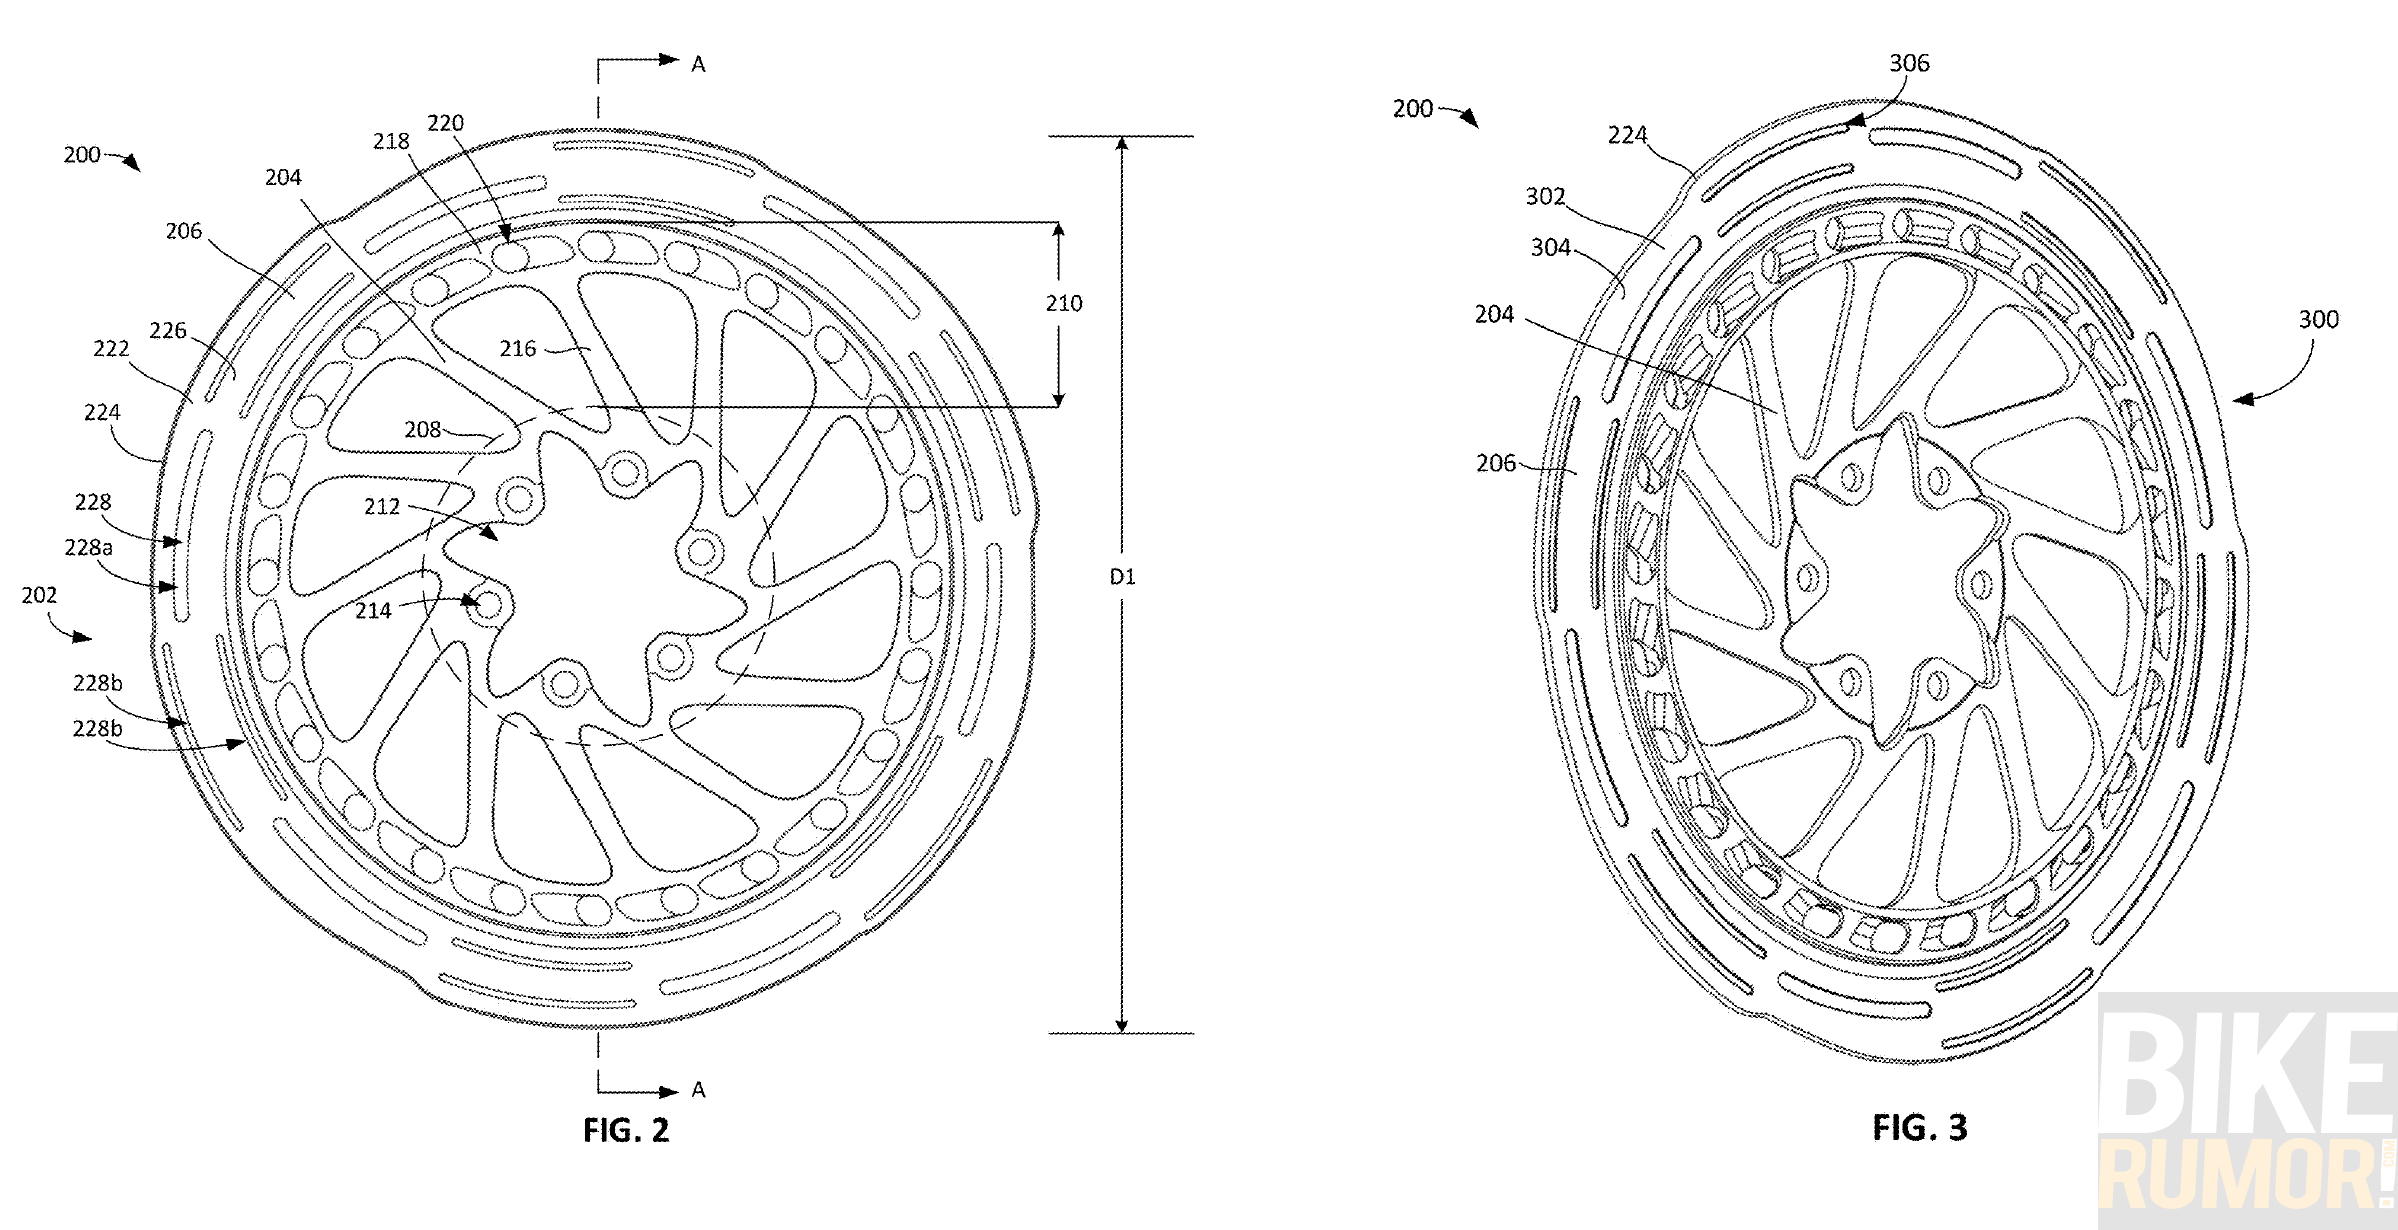 sram one piece brake rotor with dual layers patent drawing